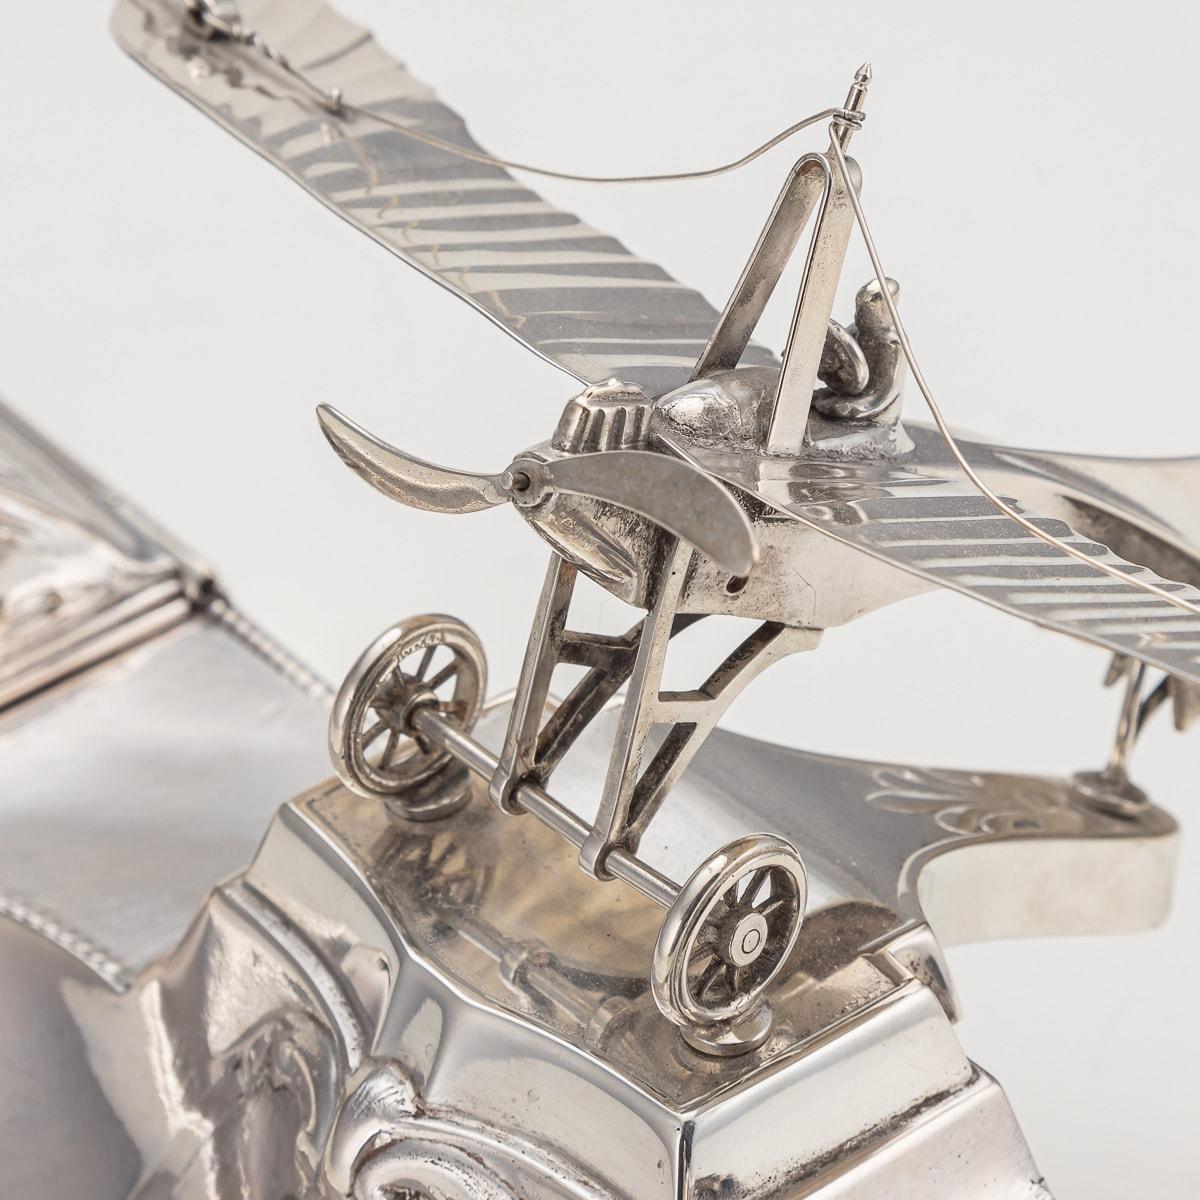 20th Century German Wmf Silver Double Inkwell With Aeroplane Theme, c.1920 10